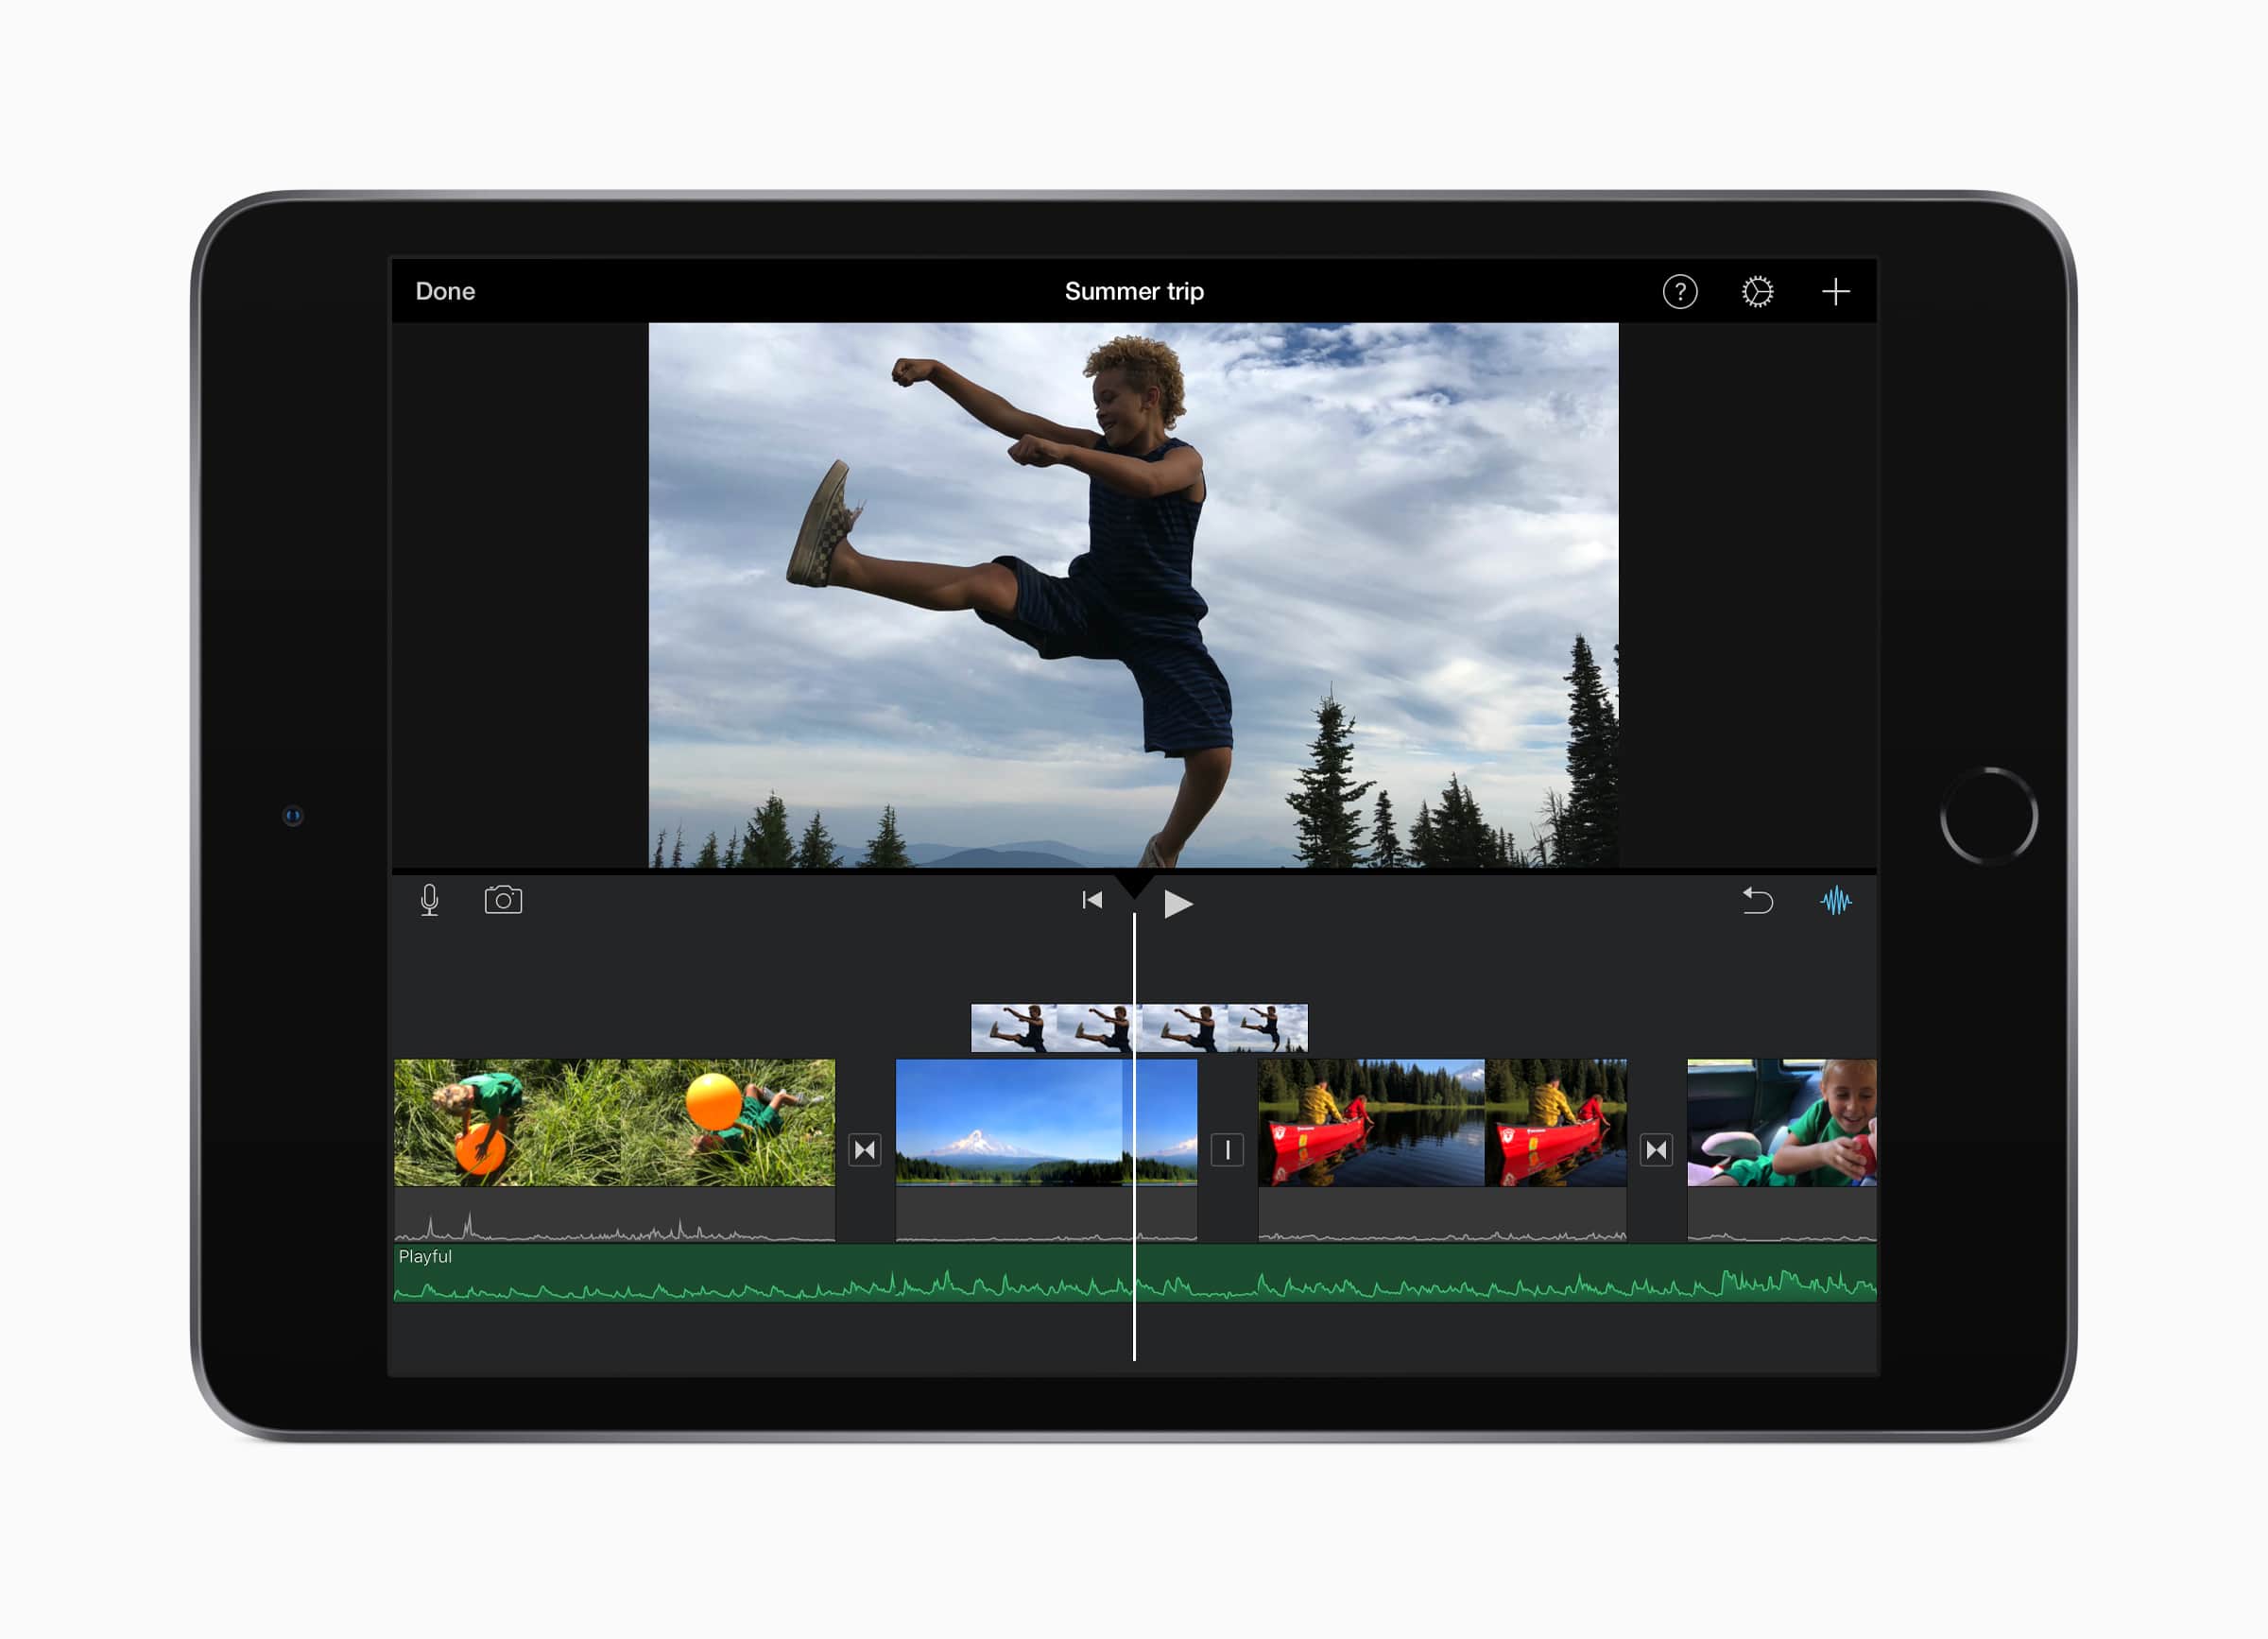 The new iPad mini can capture high-resolution video and photos. Plus, its powerful A12 Bionic chip makes editing 4K films easy and smooth, Apple says.